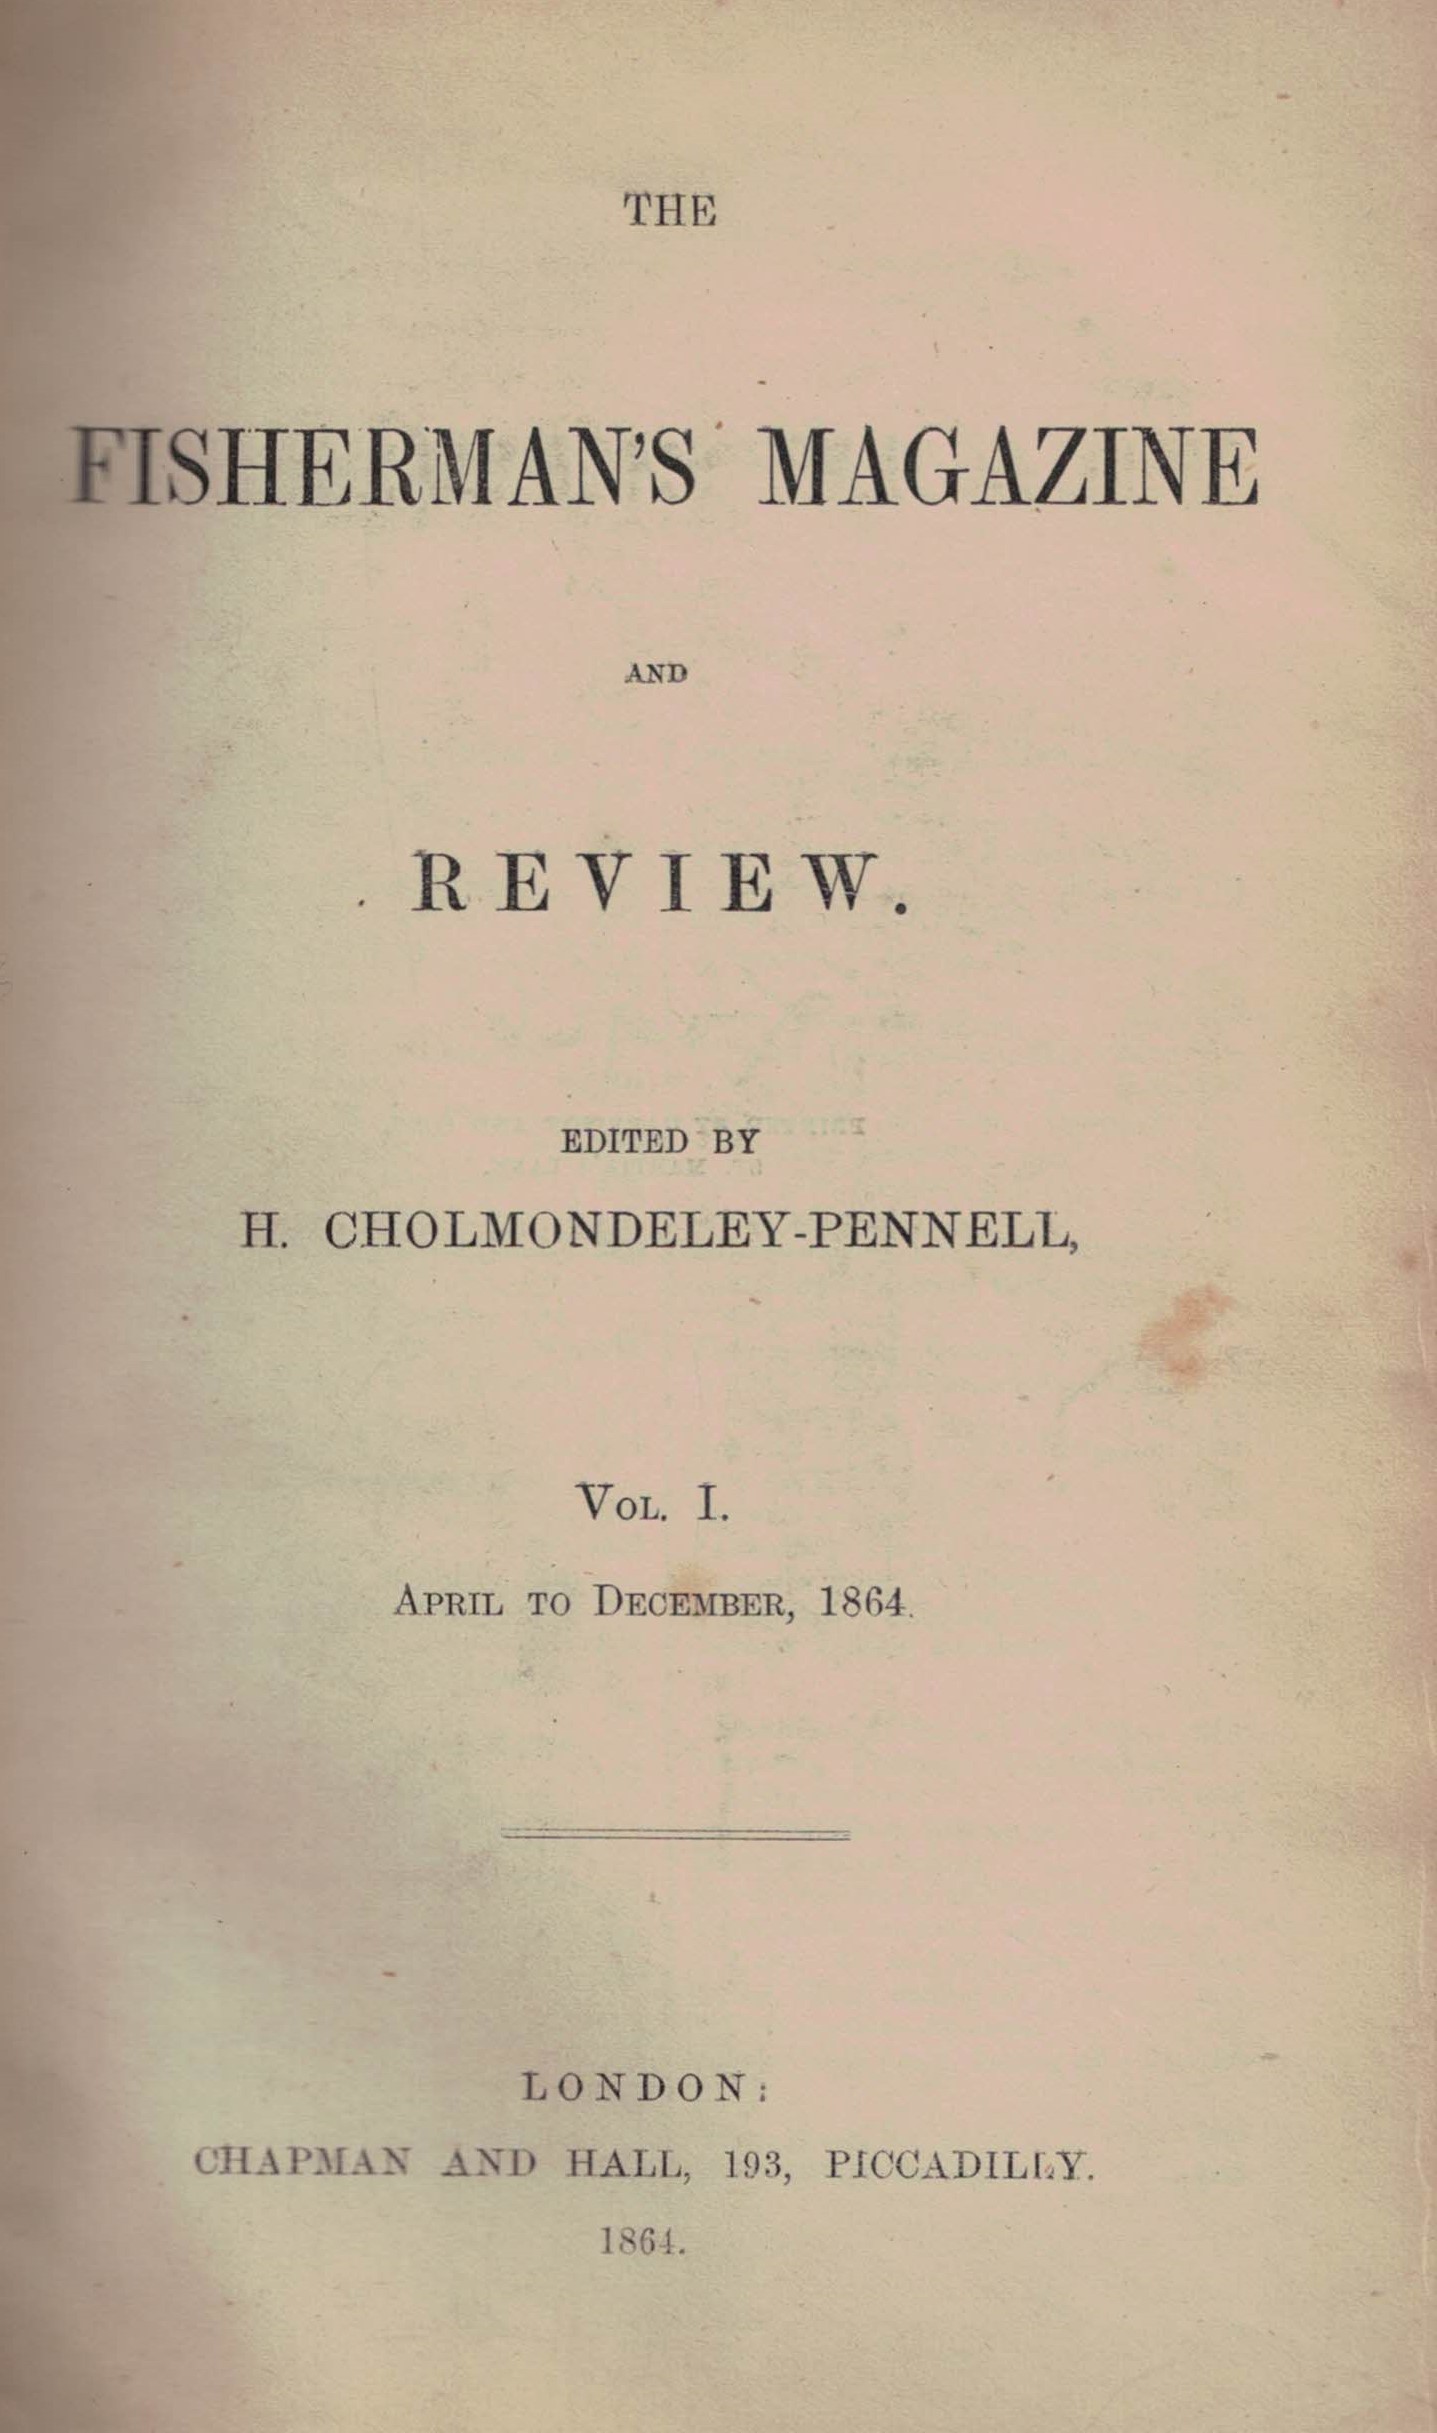 The Fisherman's Magazine and Review. Vol. I. April to December 1864.